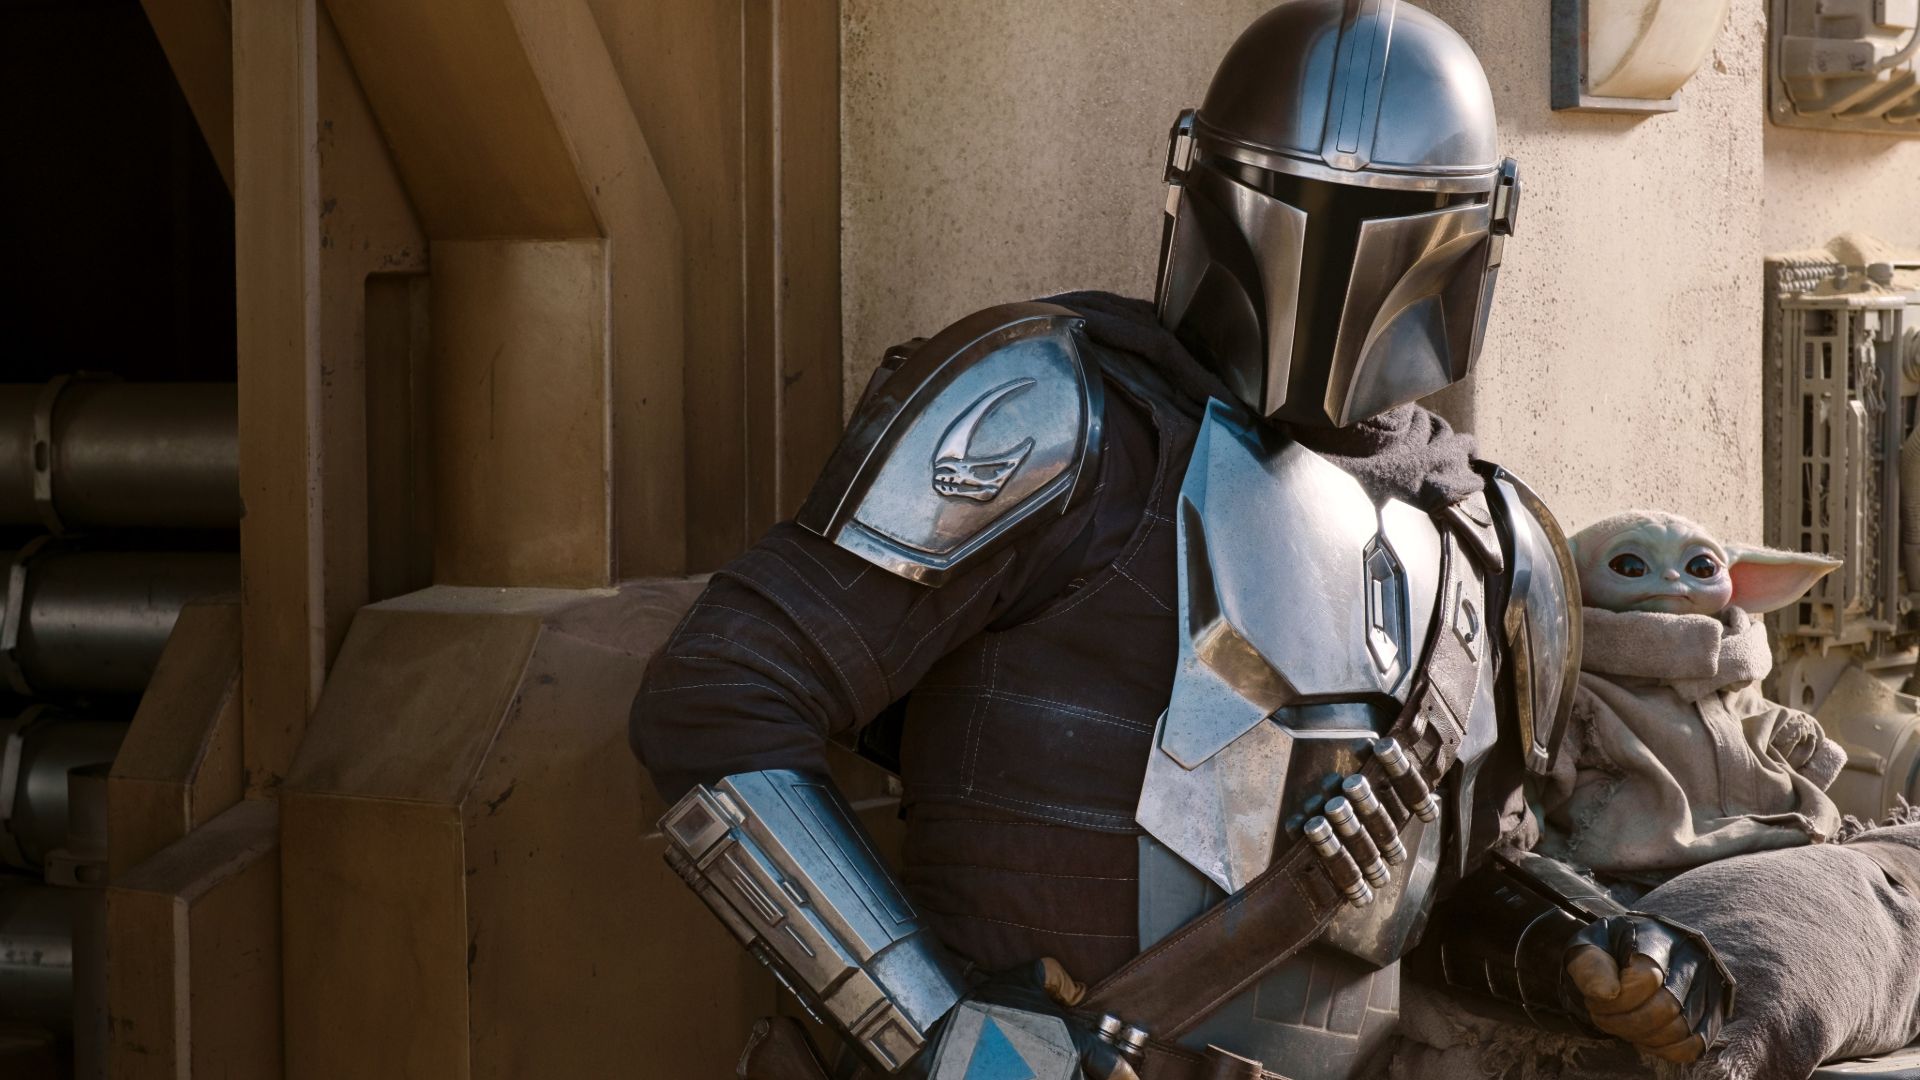 The Mandalorian season 2 release date, new trailer, director list, and more